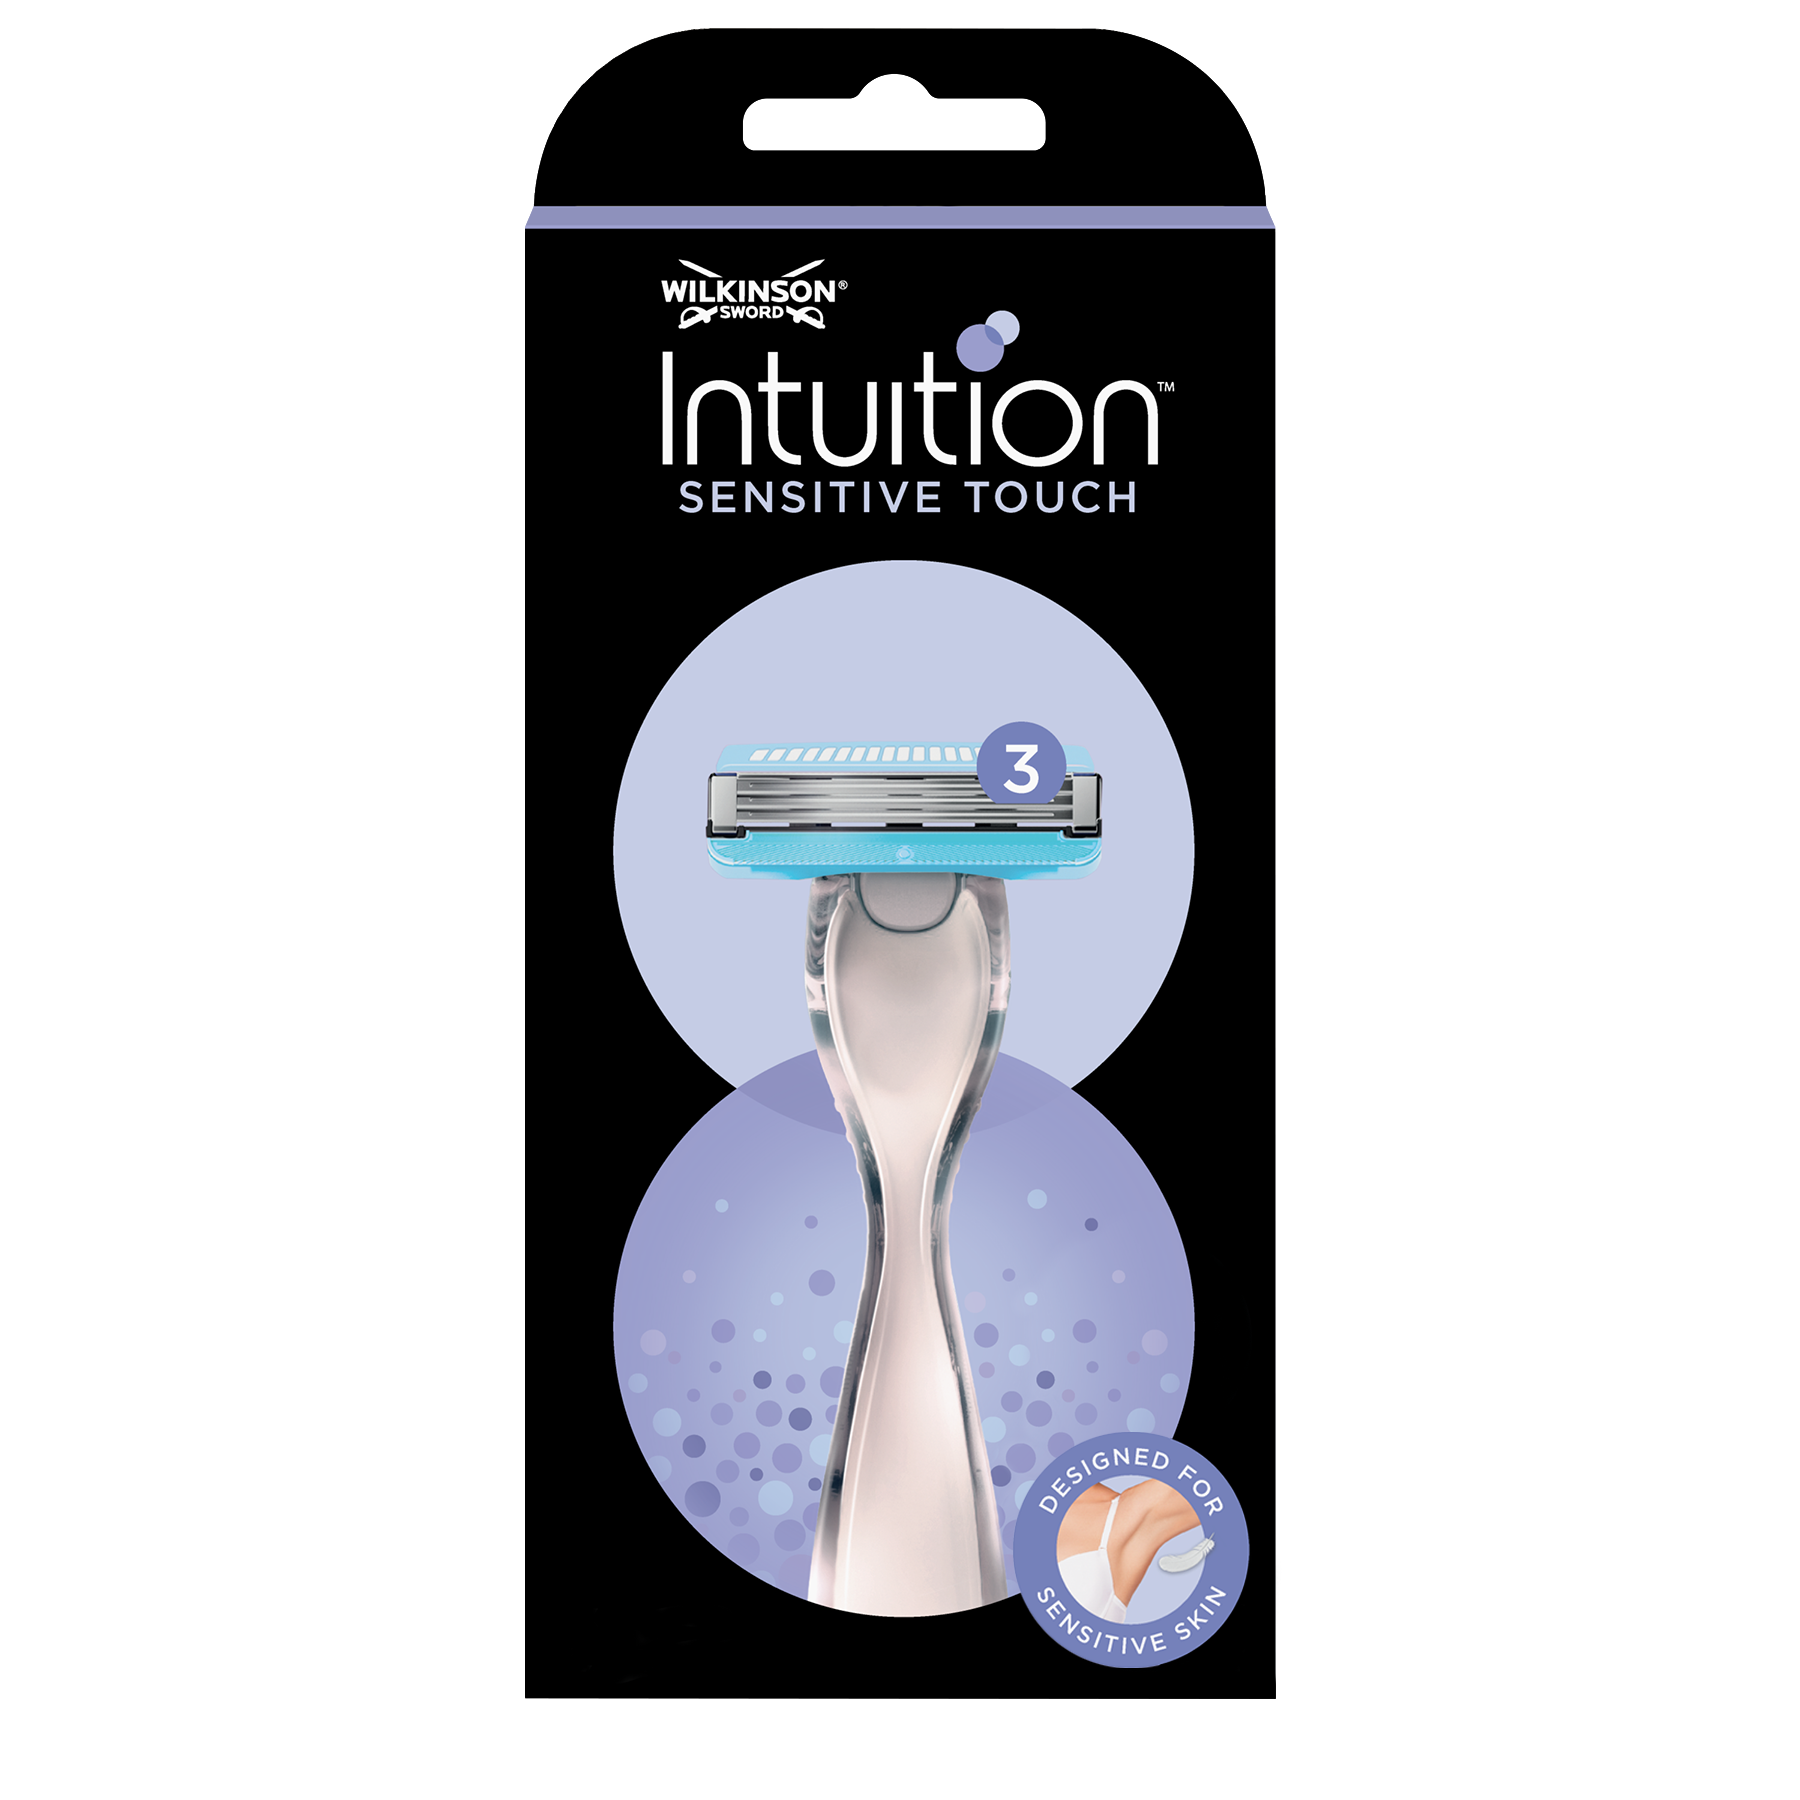 Intuition Sensitive Touch Rasierer